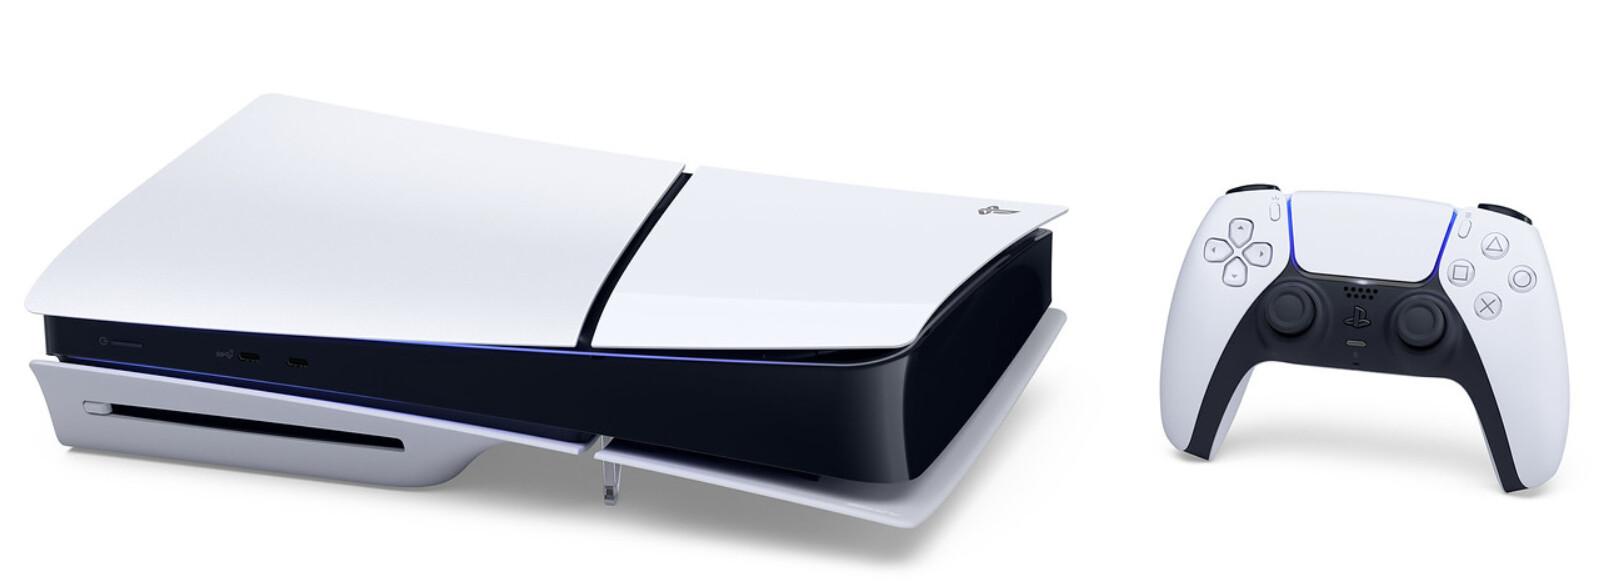 Sony Announces Refreshed, Slimmer PlayStation Consoles for the